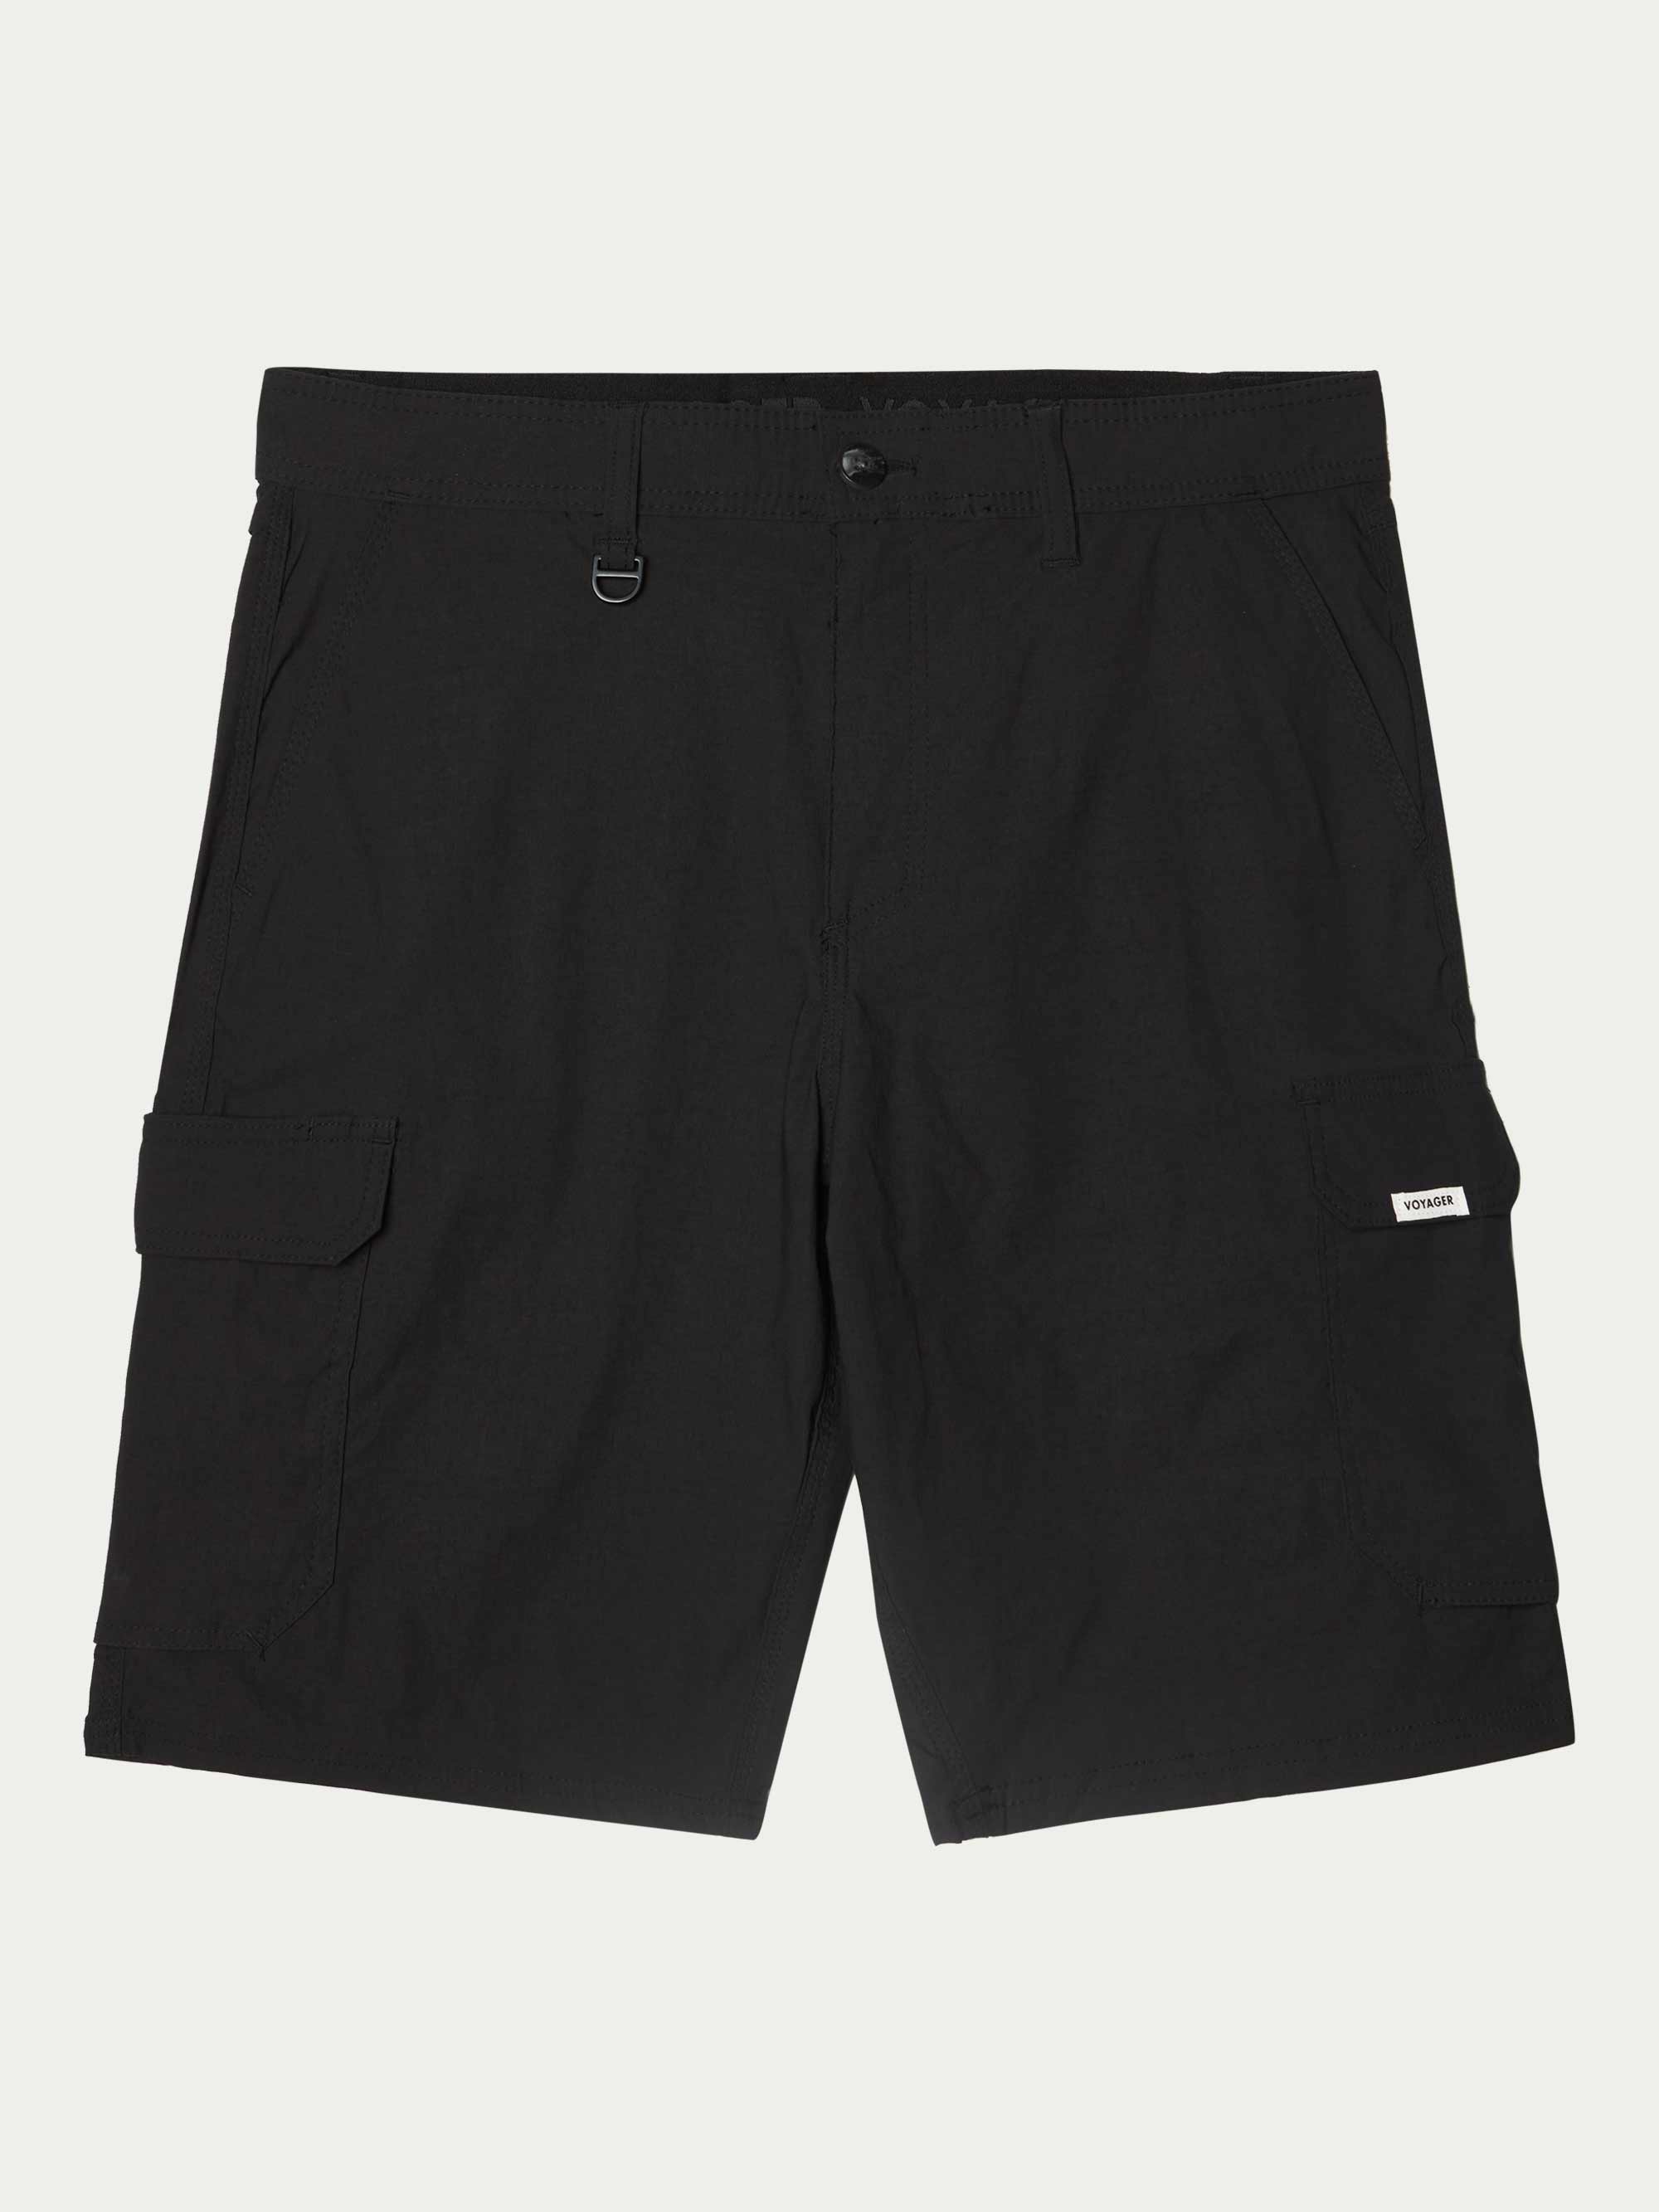 Expedition Shorts - Black | Voyager Goods